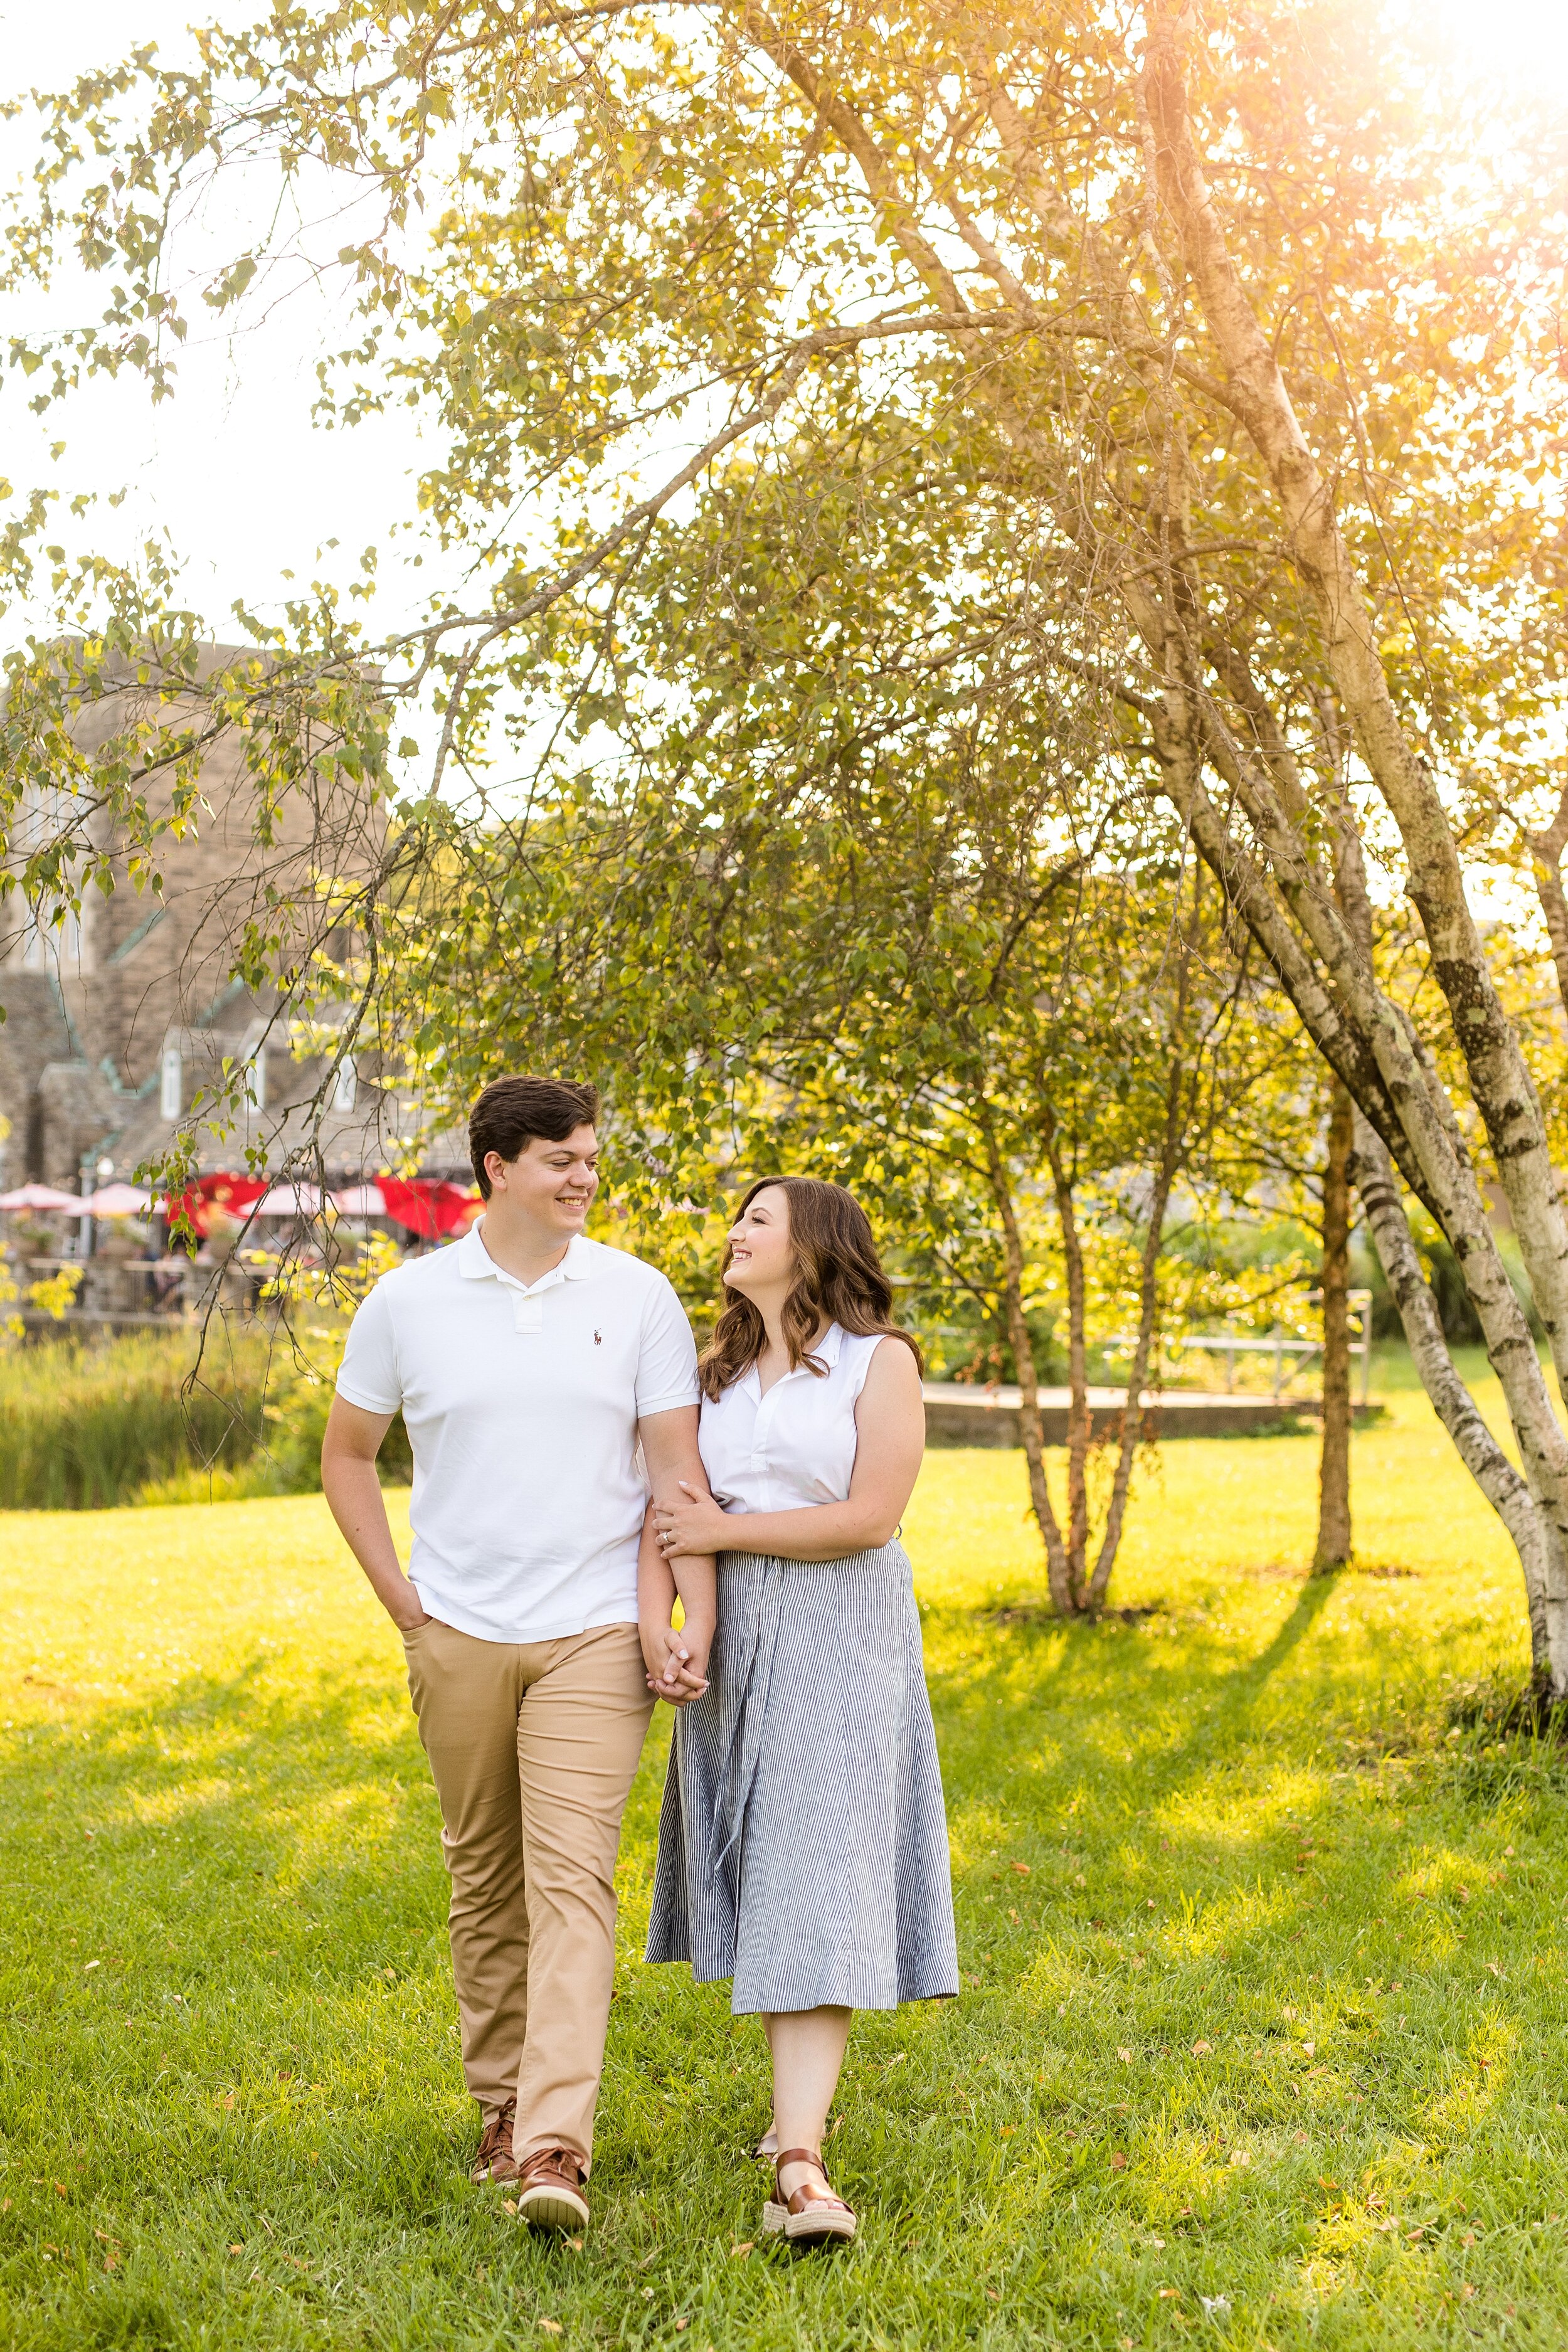 north park engagement photos, north park couple photo shoot, locations in pittsburgh for engagement photos, pittsburgh wedding photographer